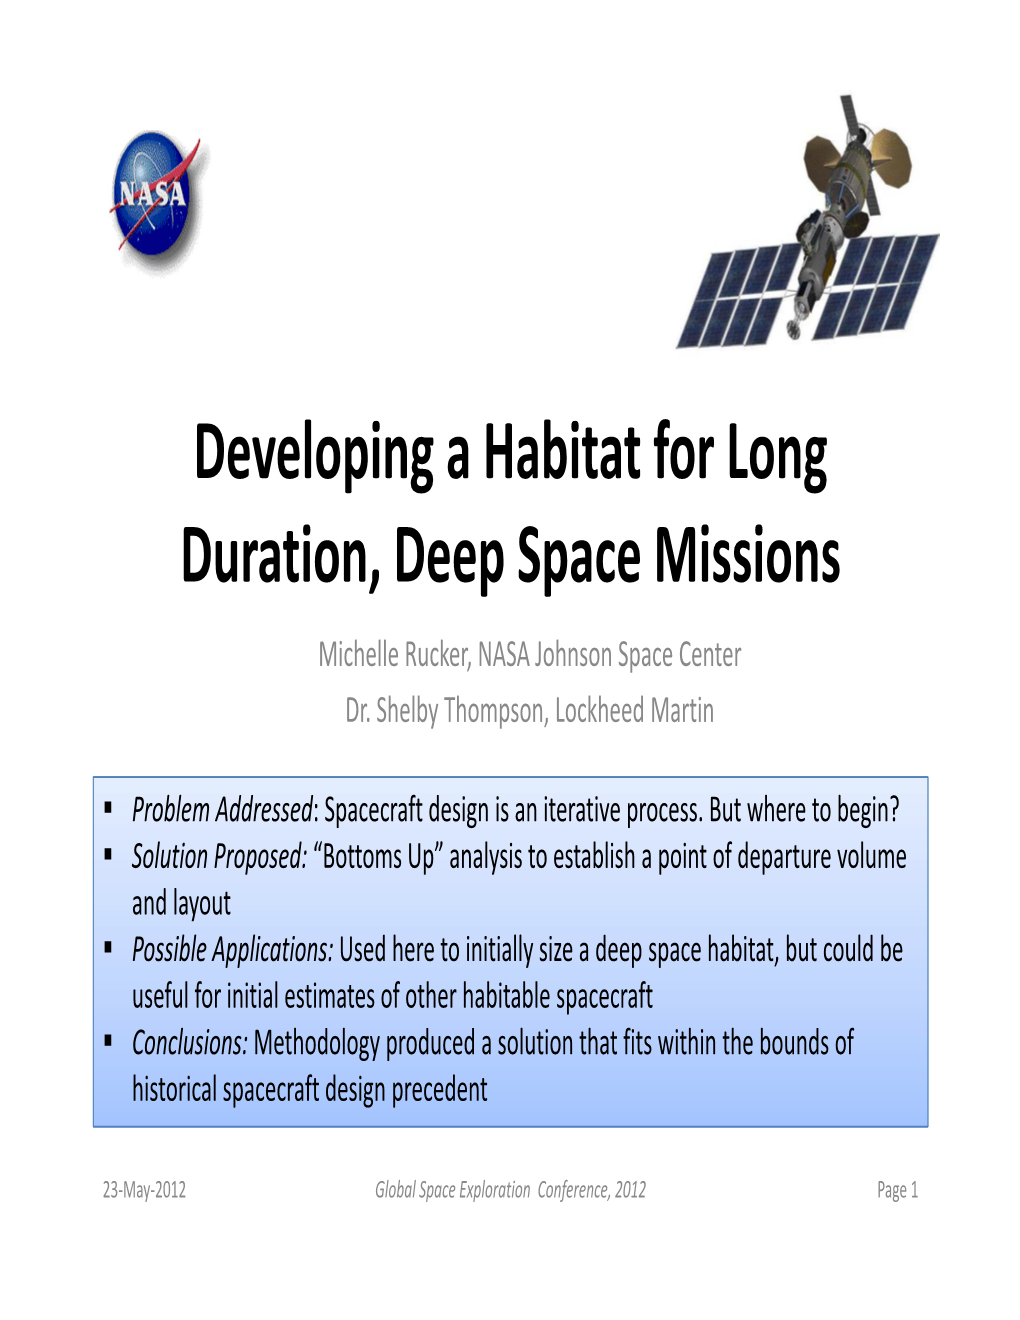 Developing a Habitat for Long Duration, Deep Space Missions Michelle Rucker, NASA Johnson Space Center Dr